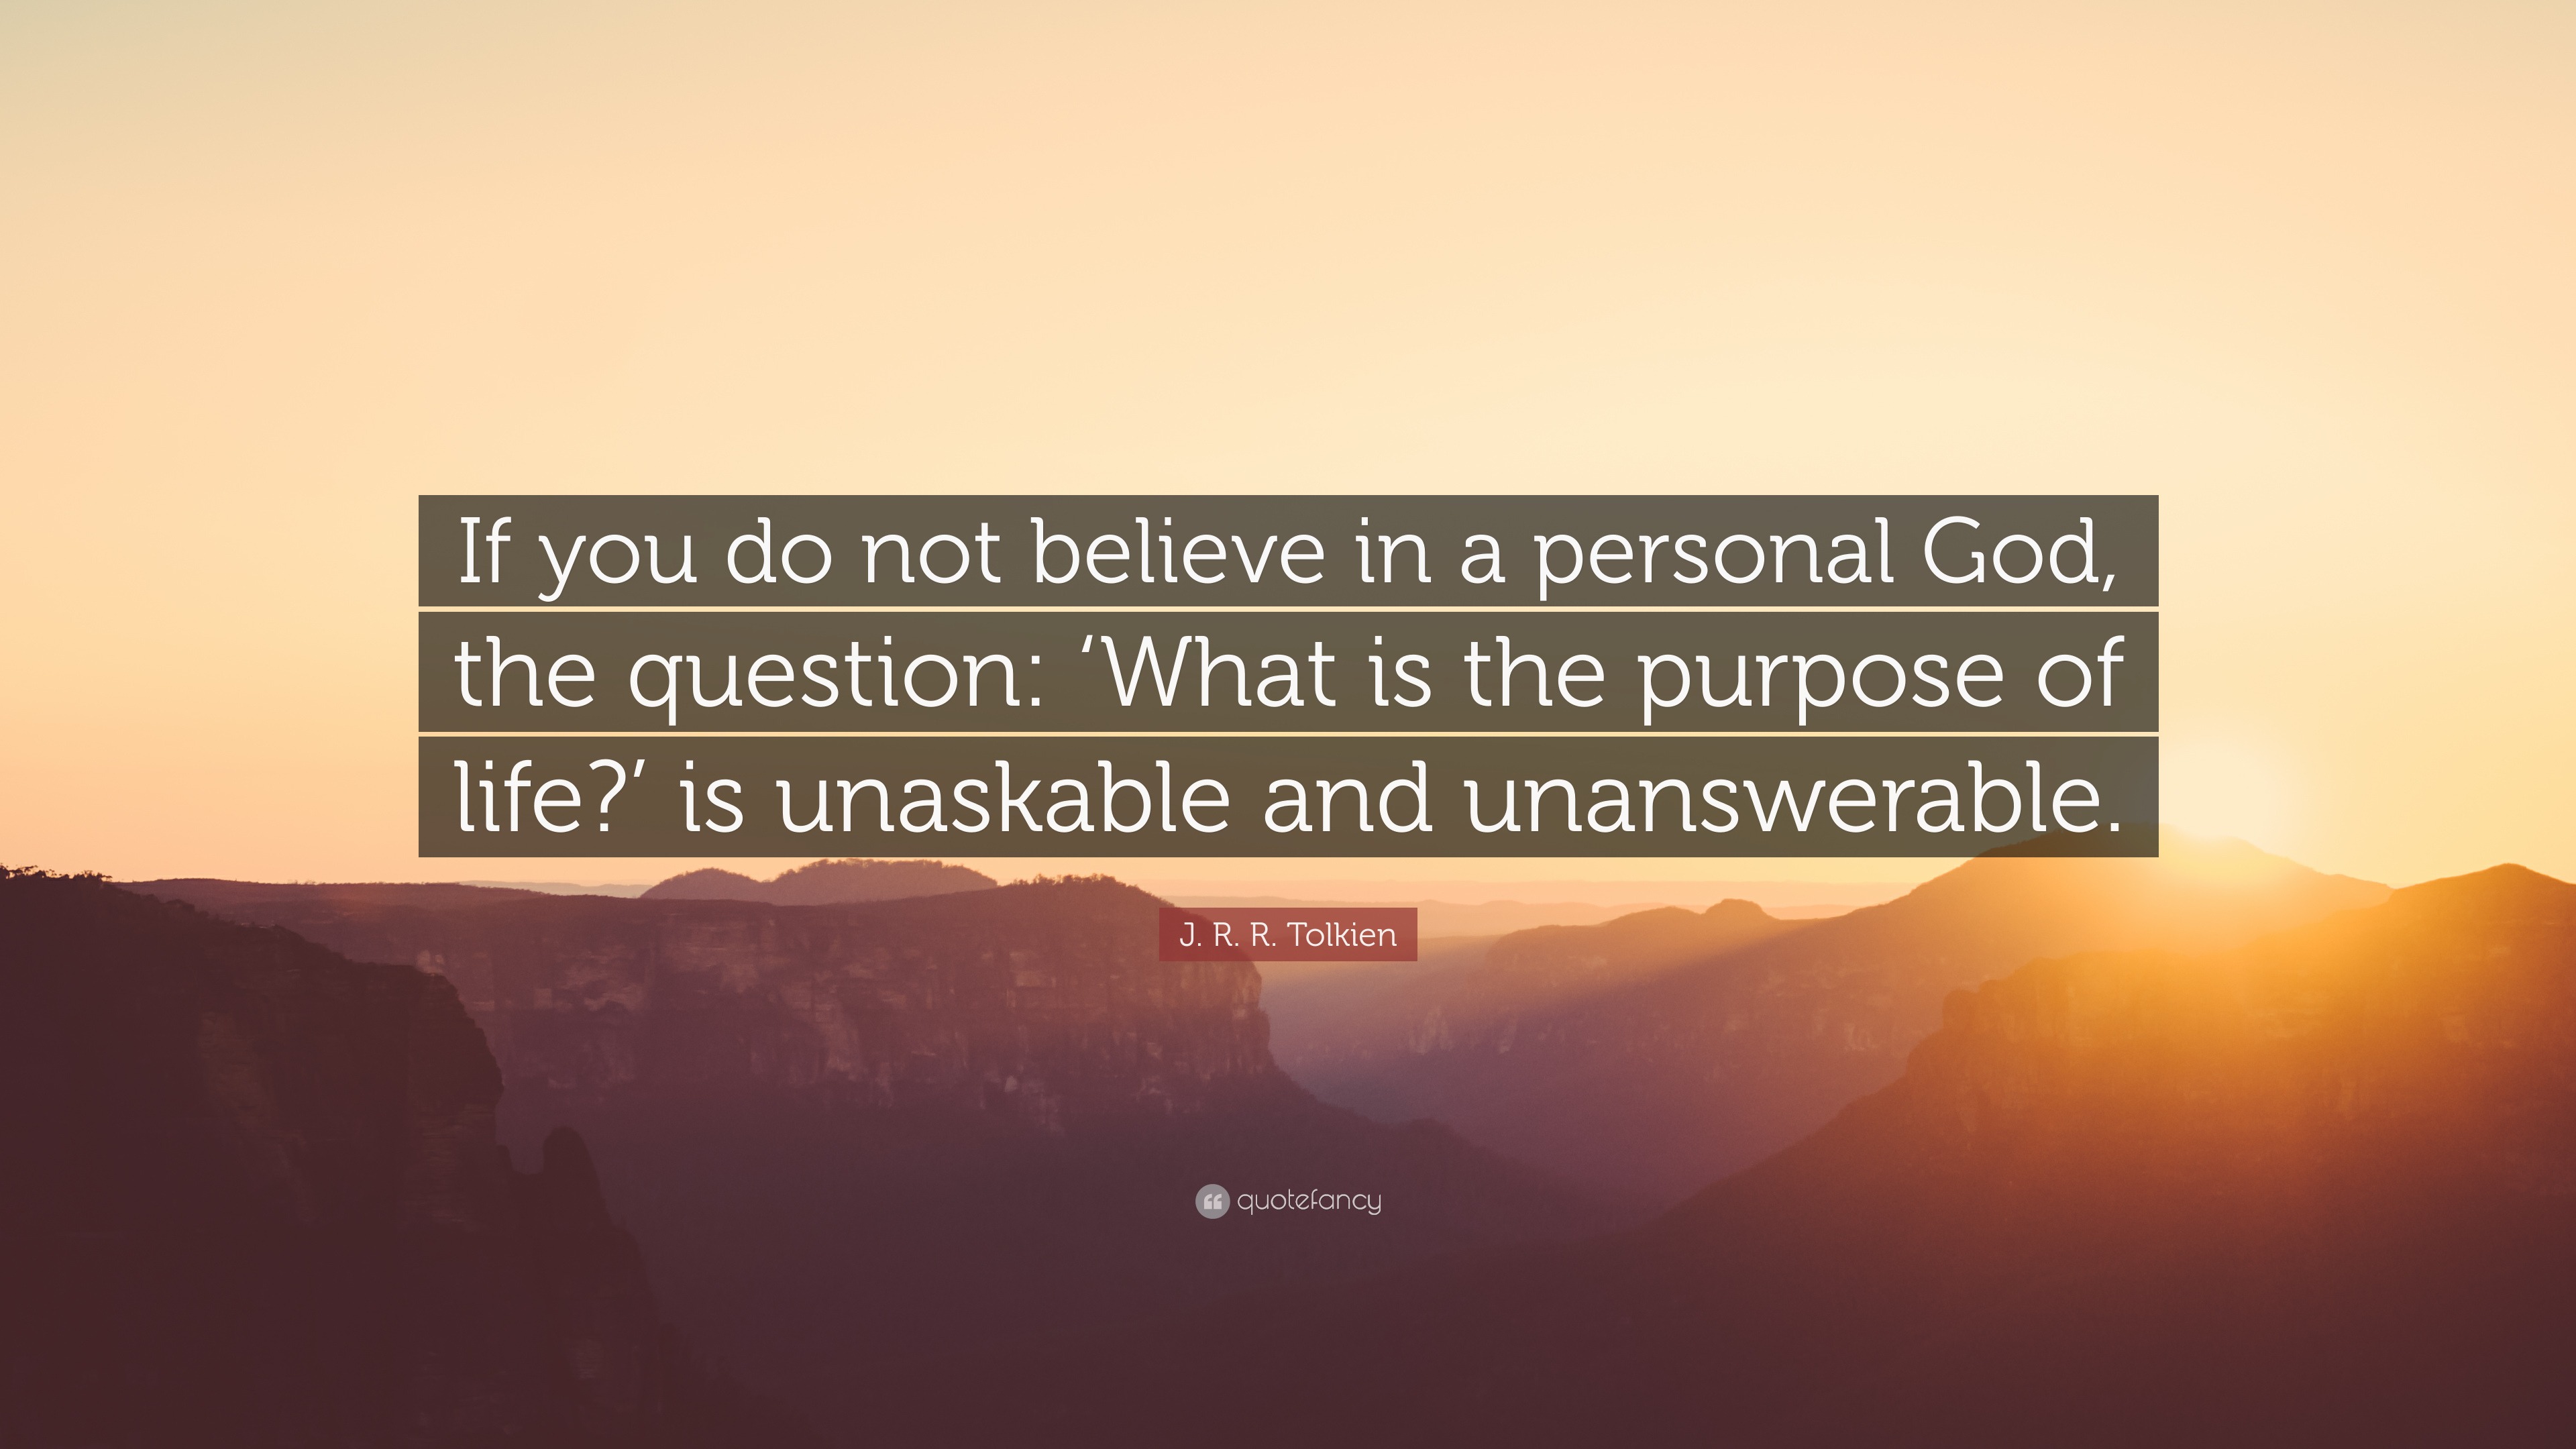 J. R. R. Tolkien Quote: “If you do not believe in a personal God, the ...